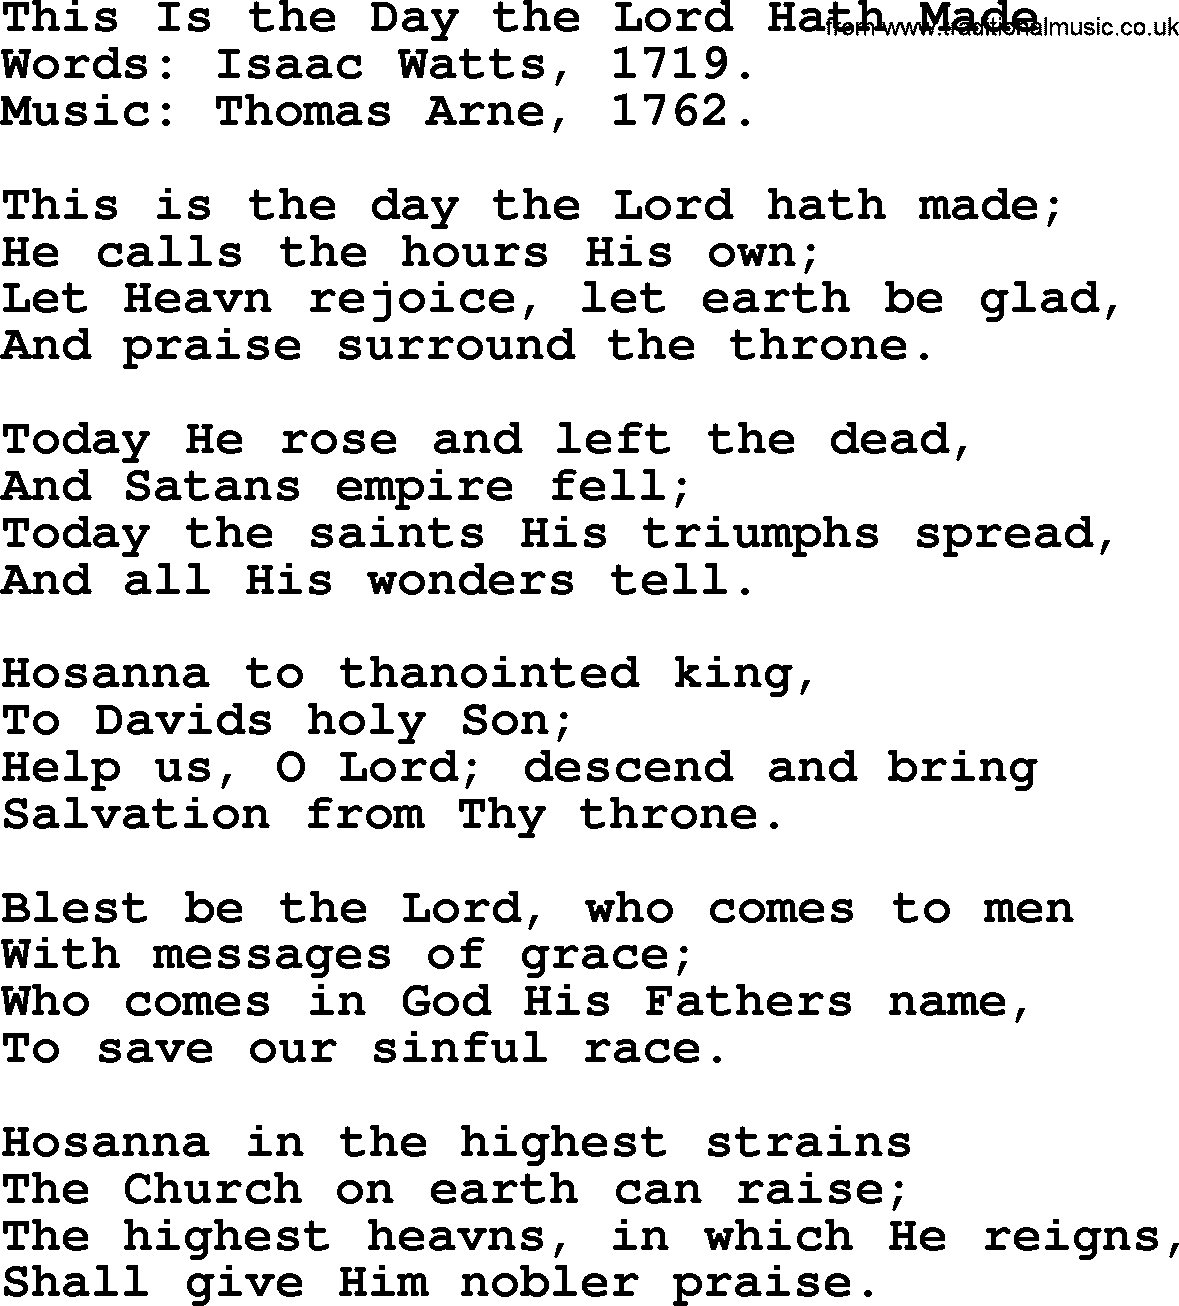 Isaac Watts Christian hymn: This Is the Day the Lord Hath Made- lyricss